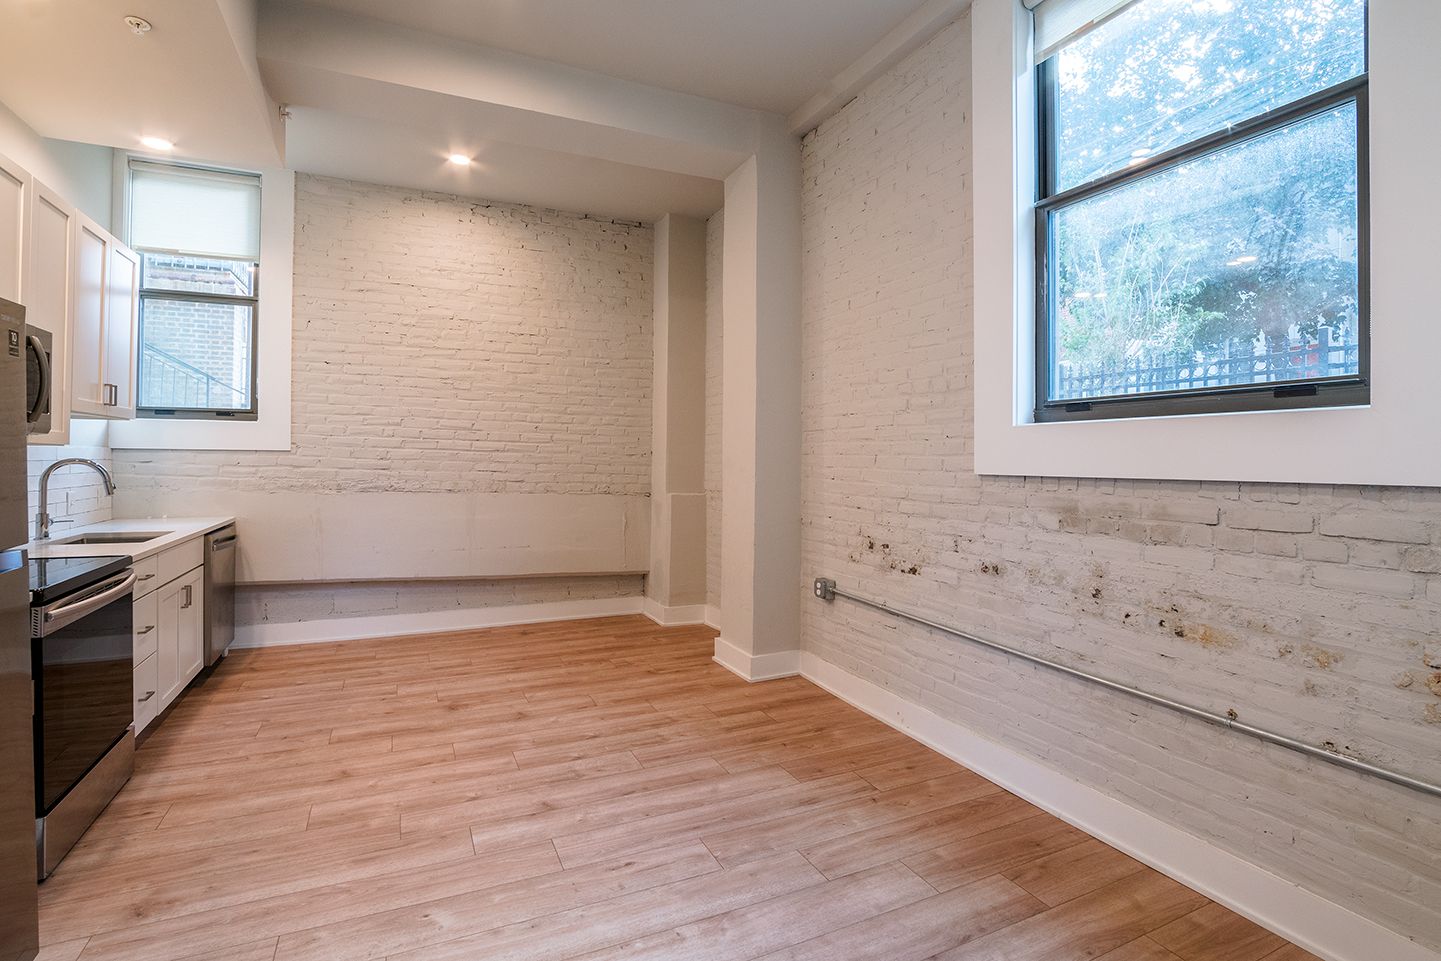 Property Photo For 1300 S. 19th St, Unit 15